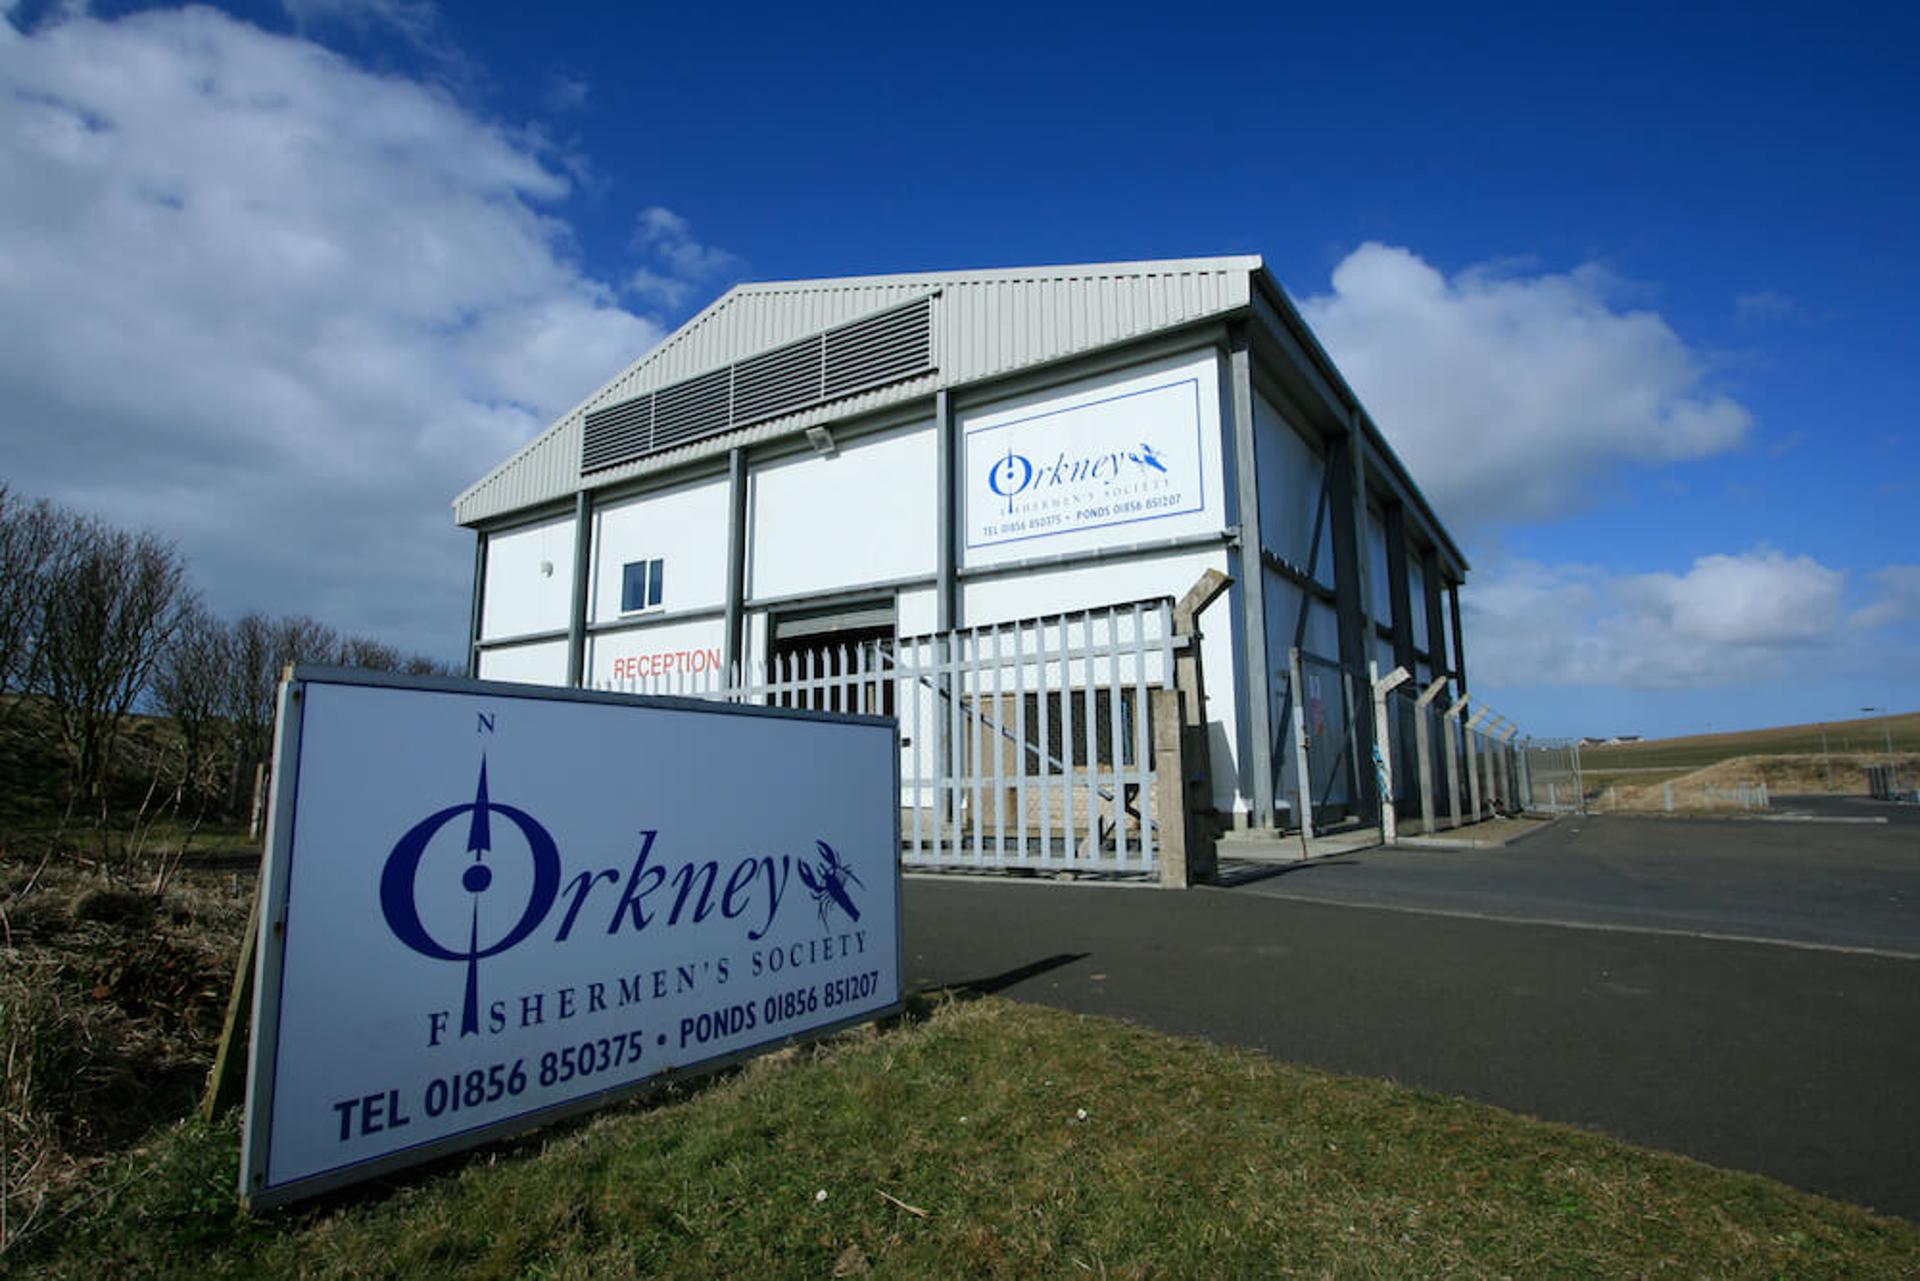 Orkney seafood co-operative acquired out of administration